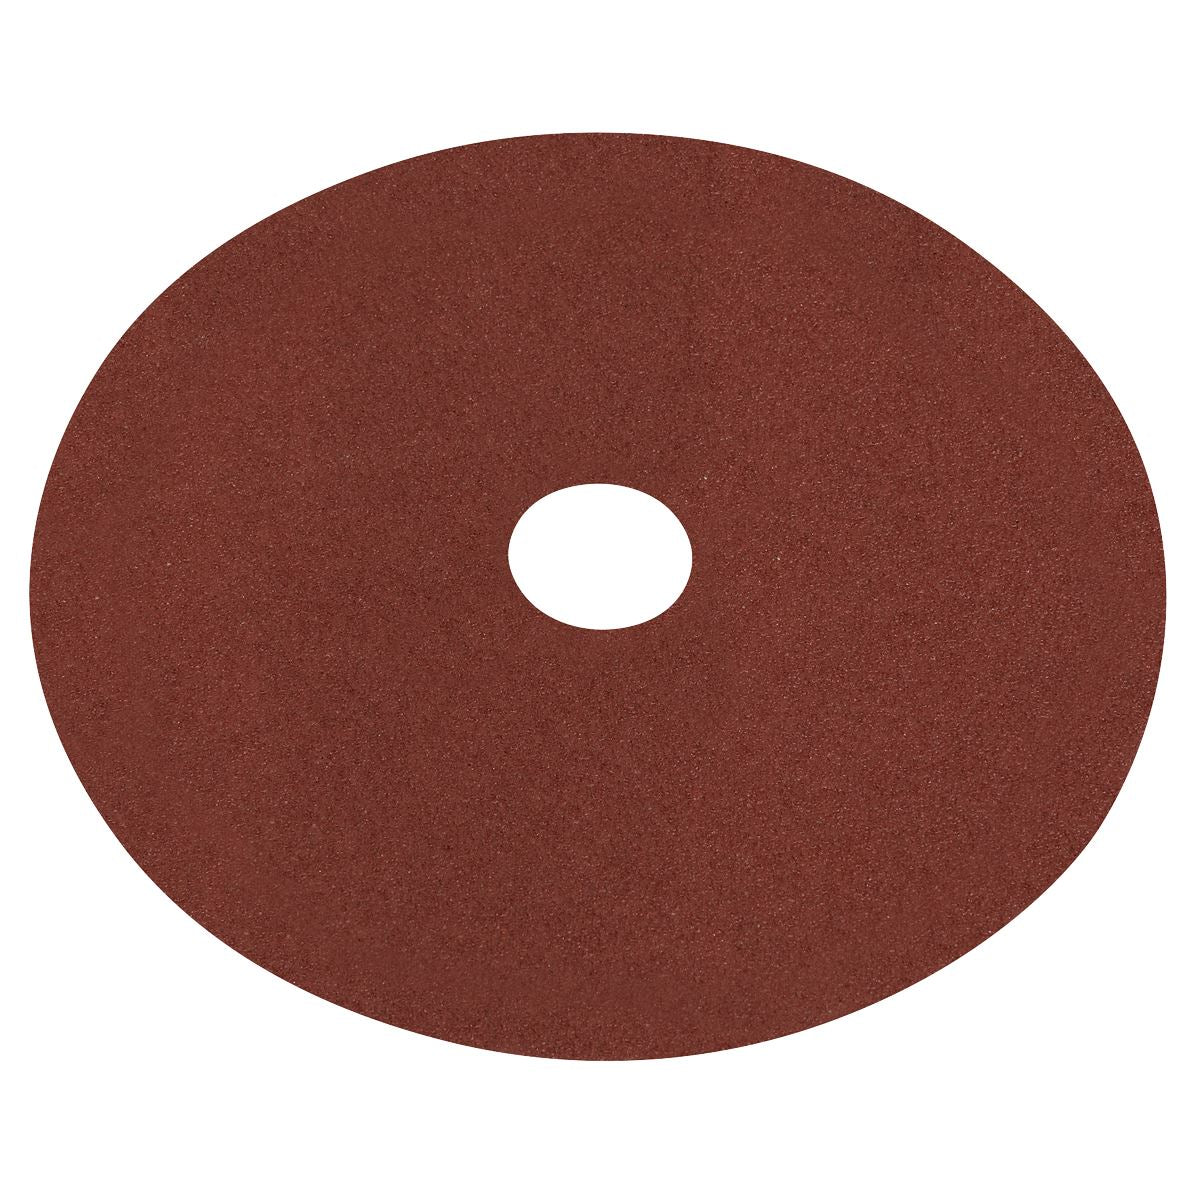 Worksafe by Sealey Fibre Backed Disc Ø100mm - 60Grit Pack of 25